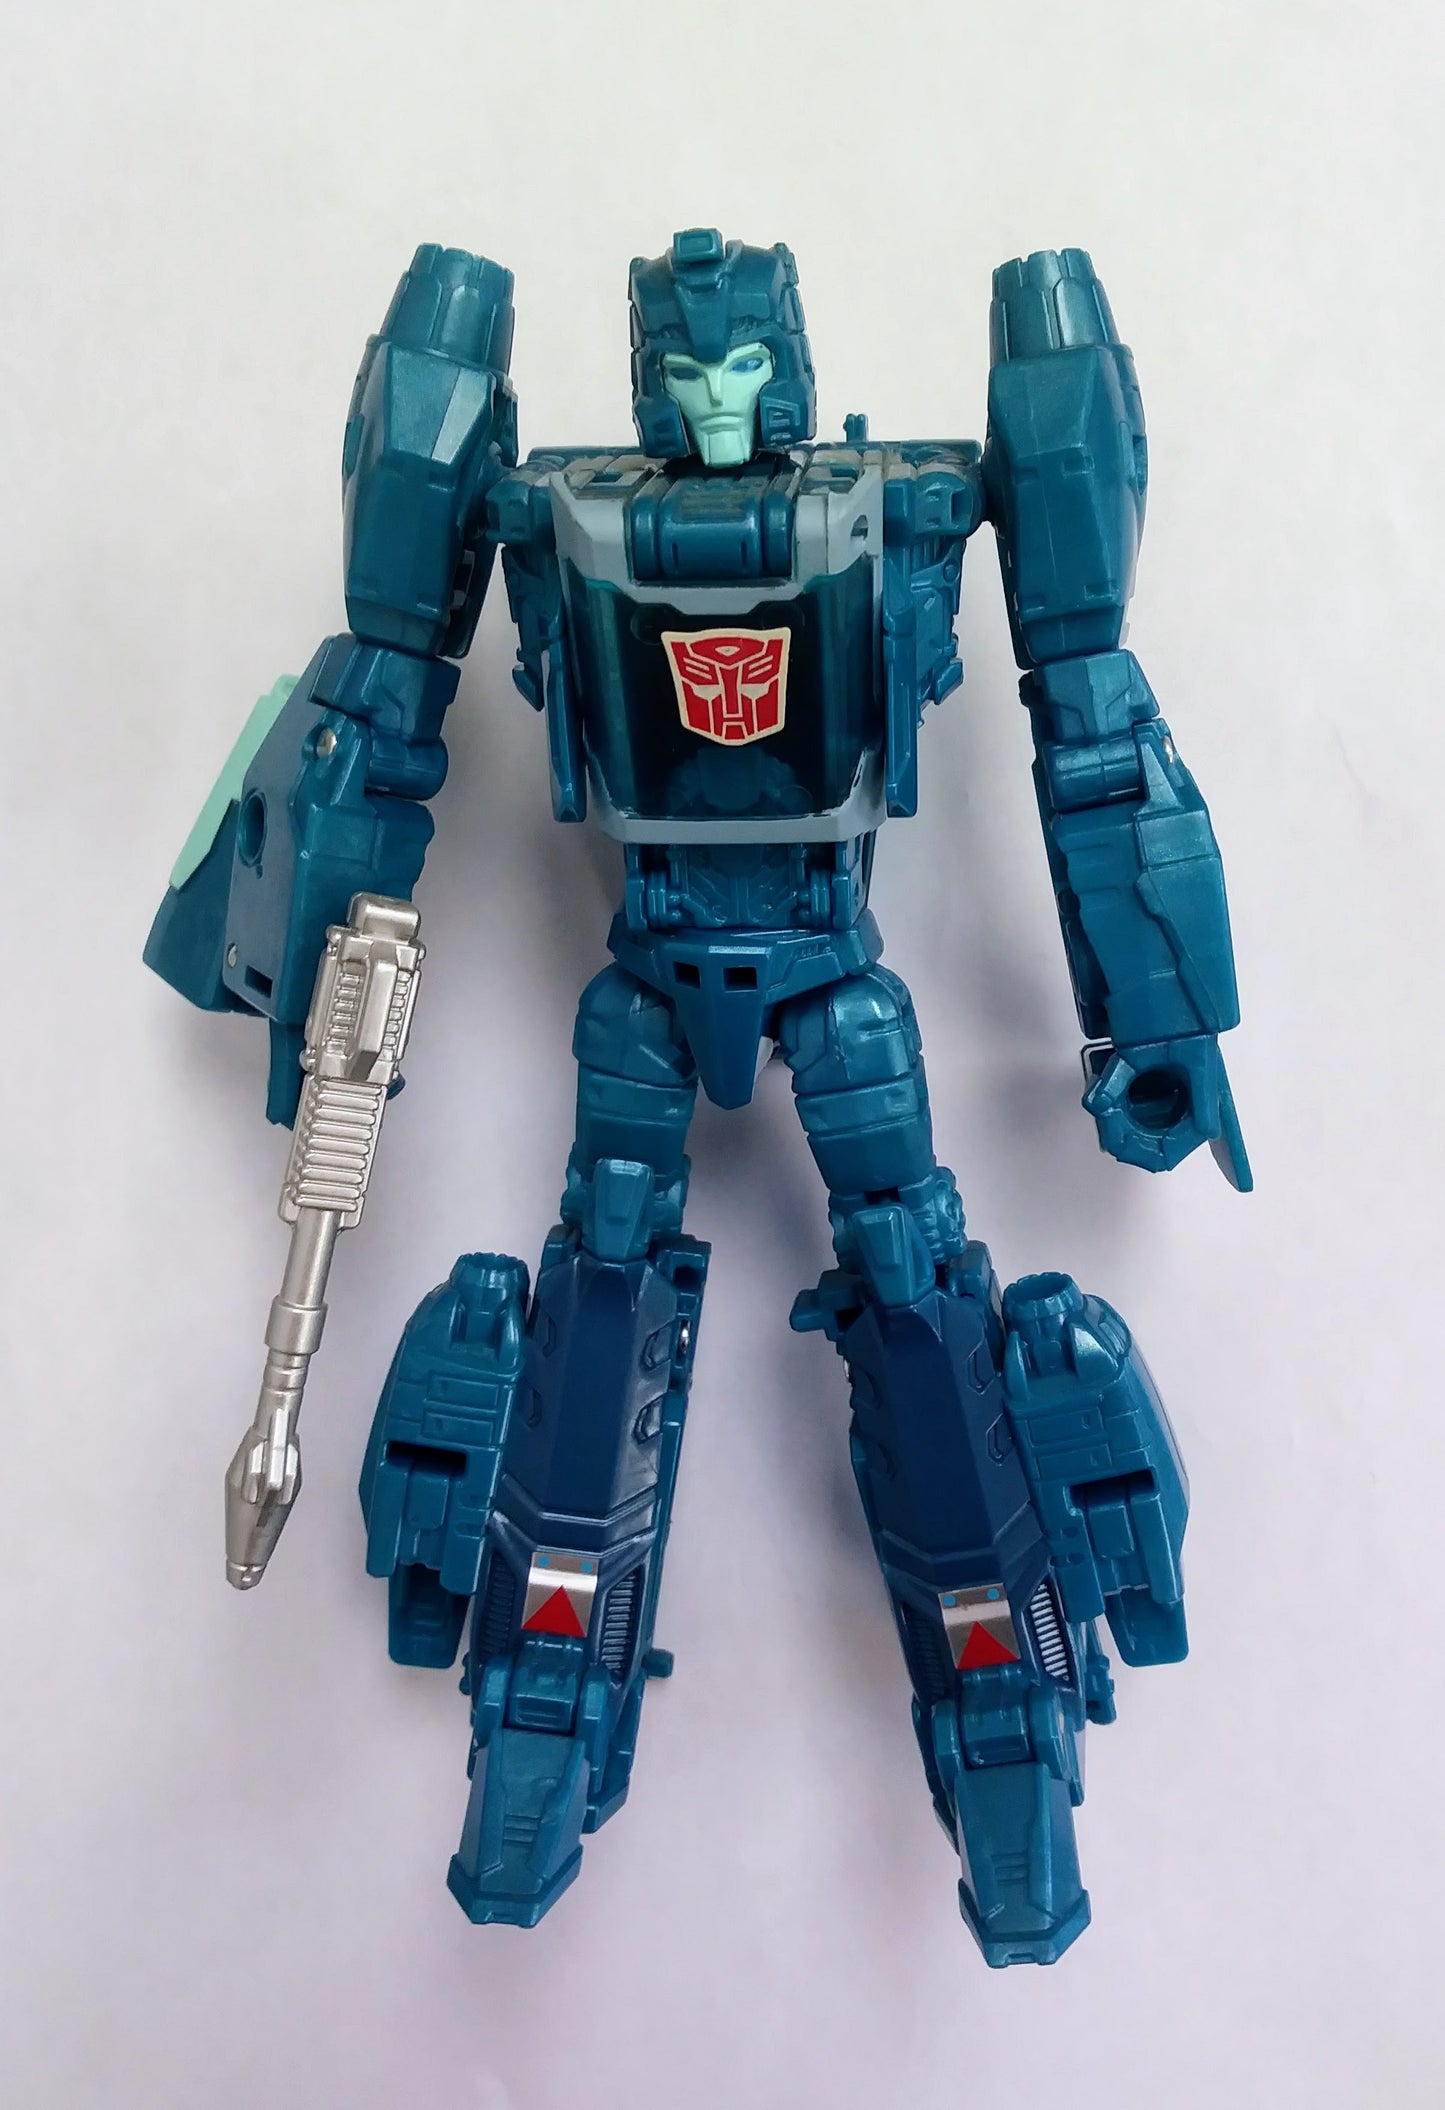 Transformers action figure - Autobot Blurr (with Hyperfire)